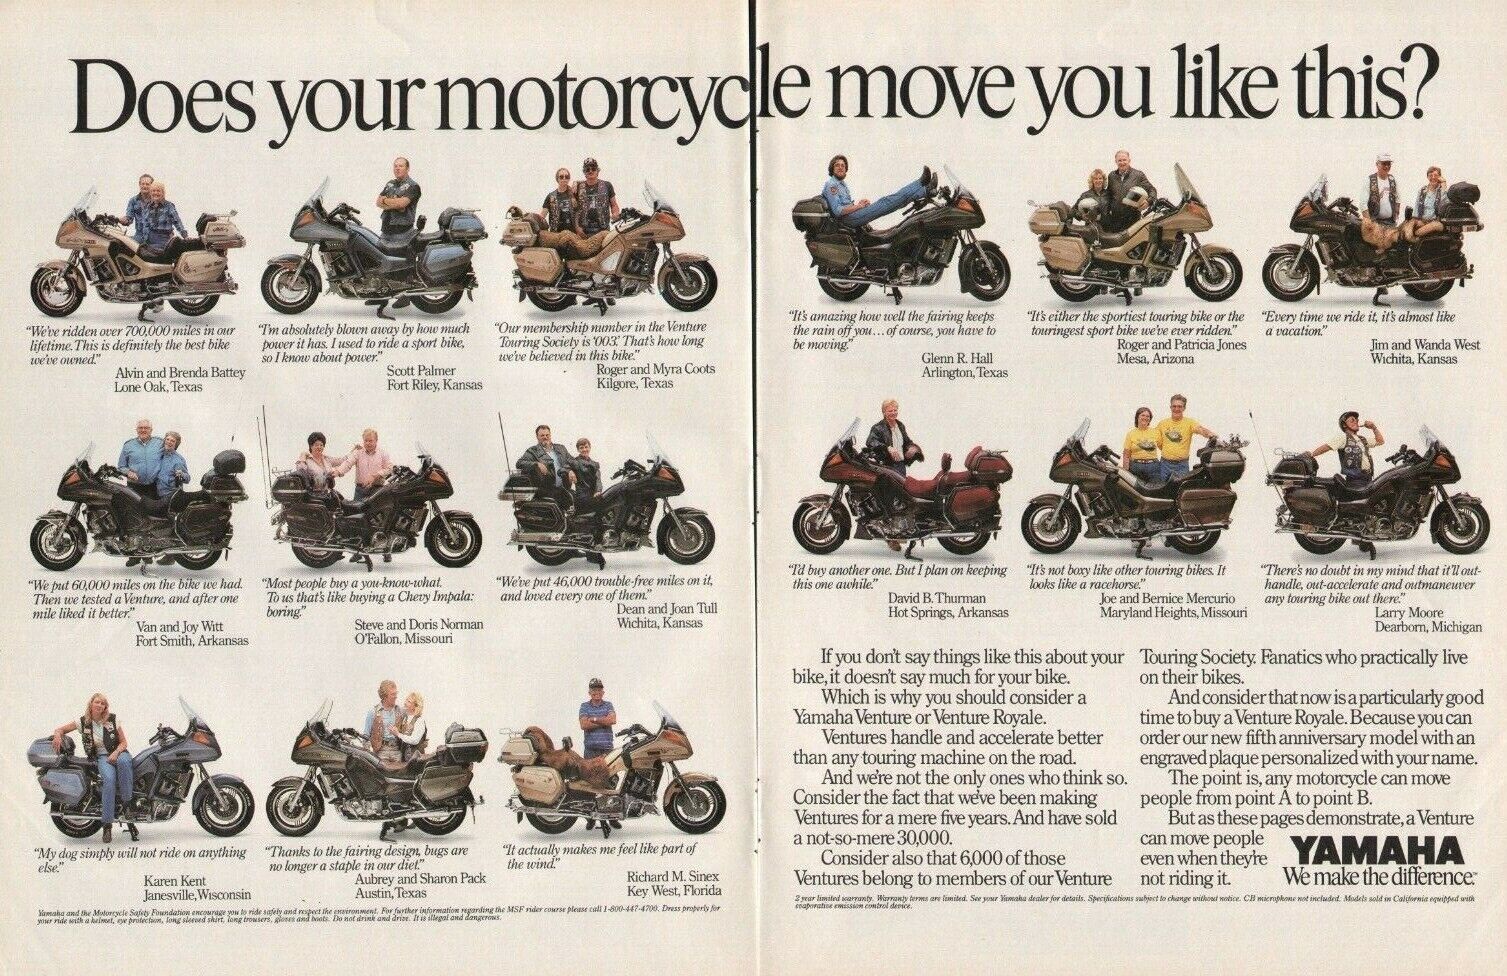 1987 Yamaha Venture Royale - 2-Page Vintage Motorcycle Ad